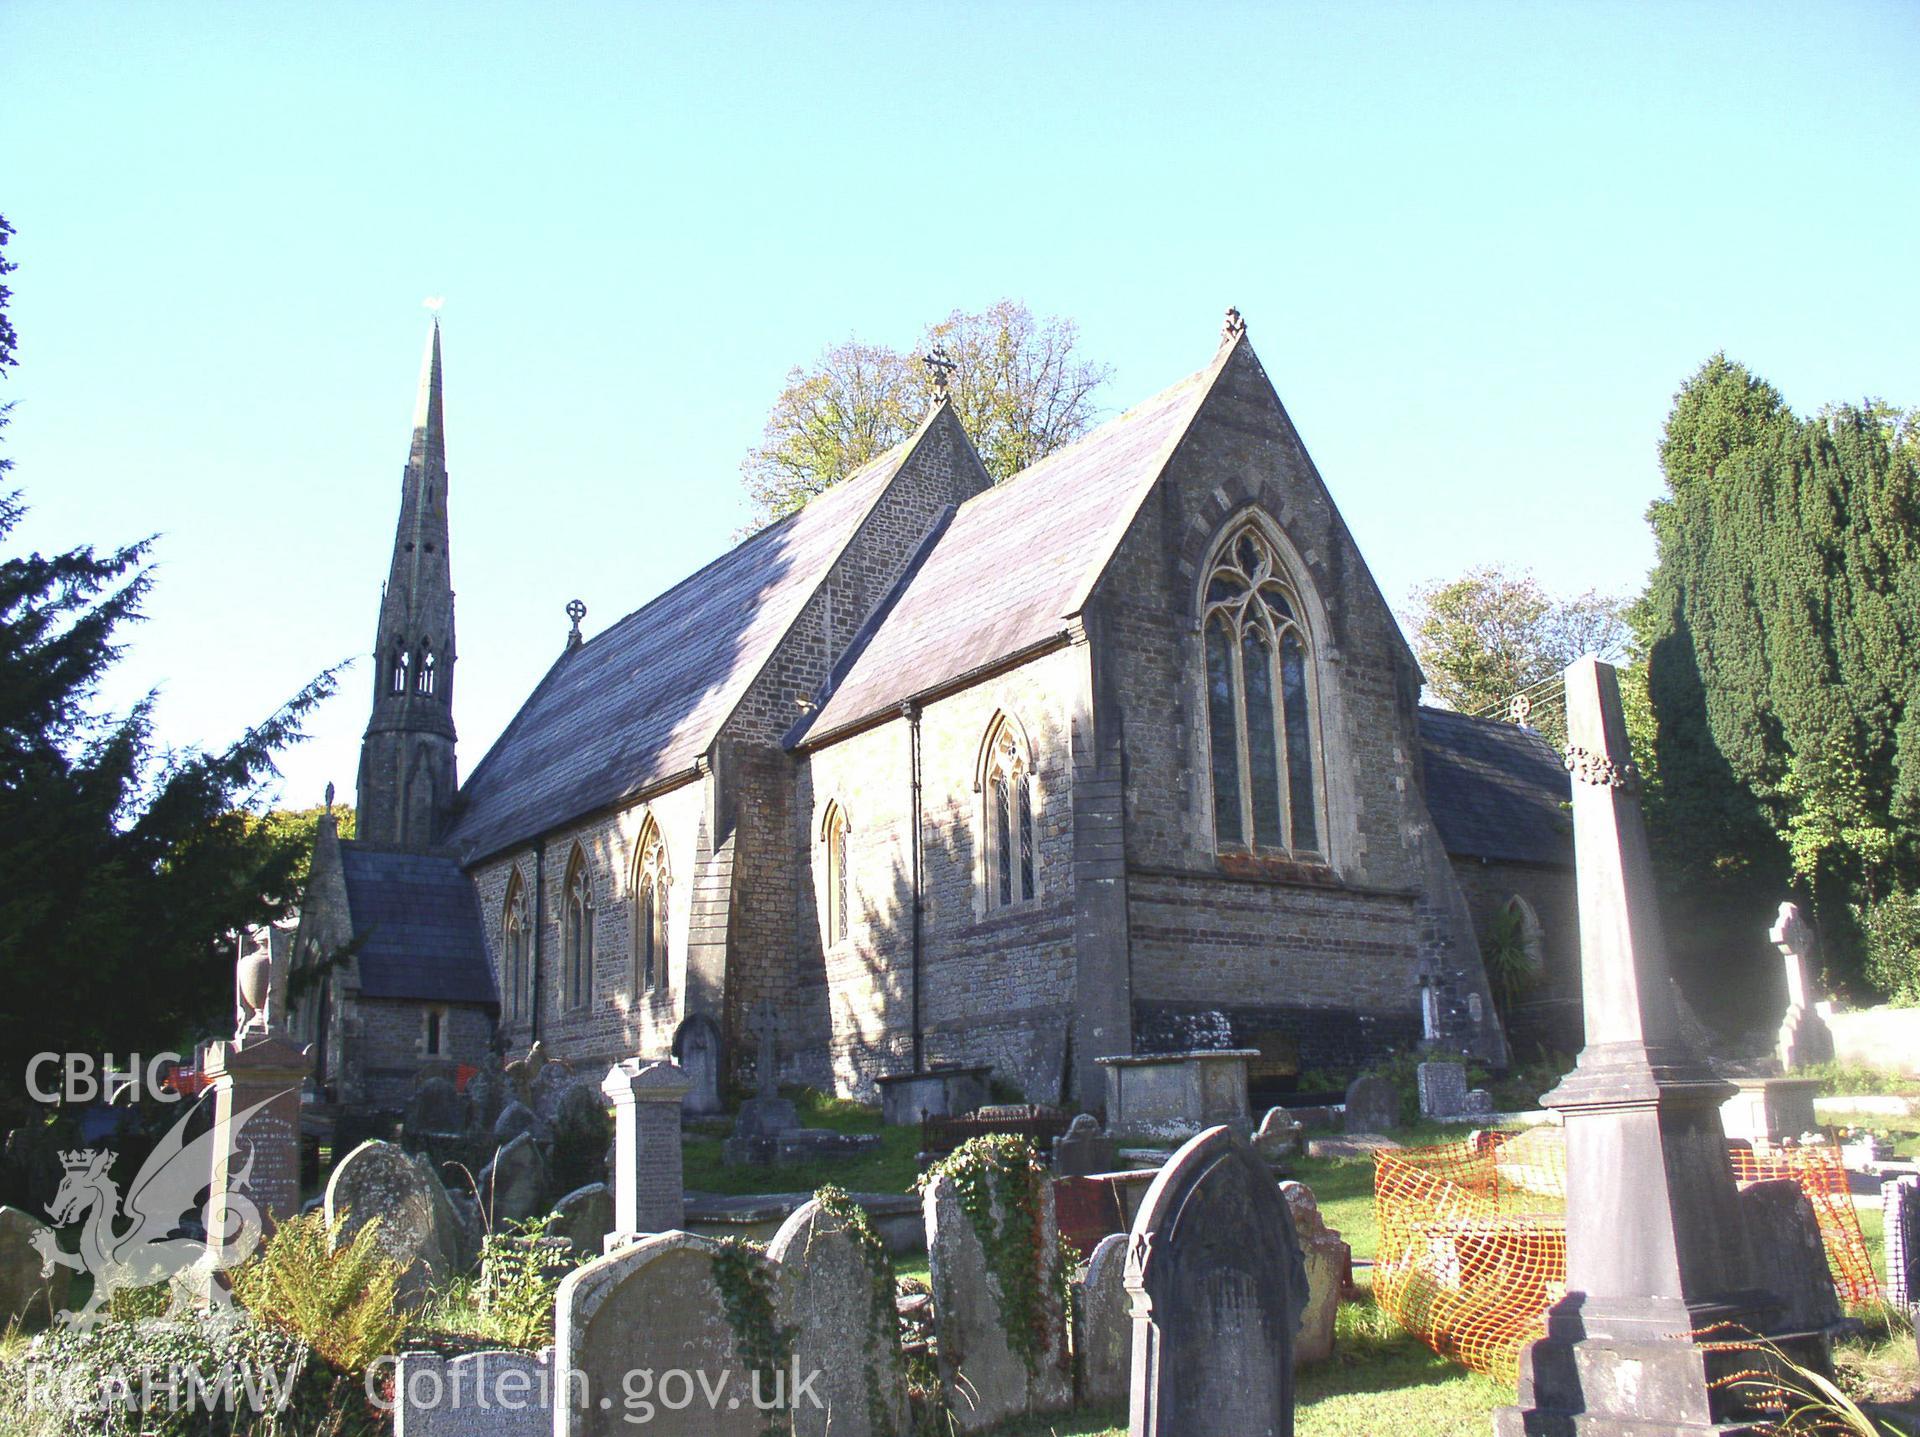 Colour digital photograph showing the exterior of St Catwg's Church, Pentyrch; Glamorgan.